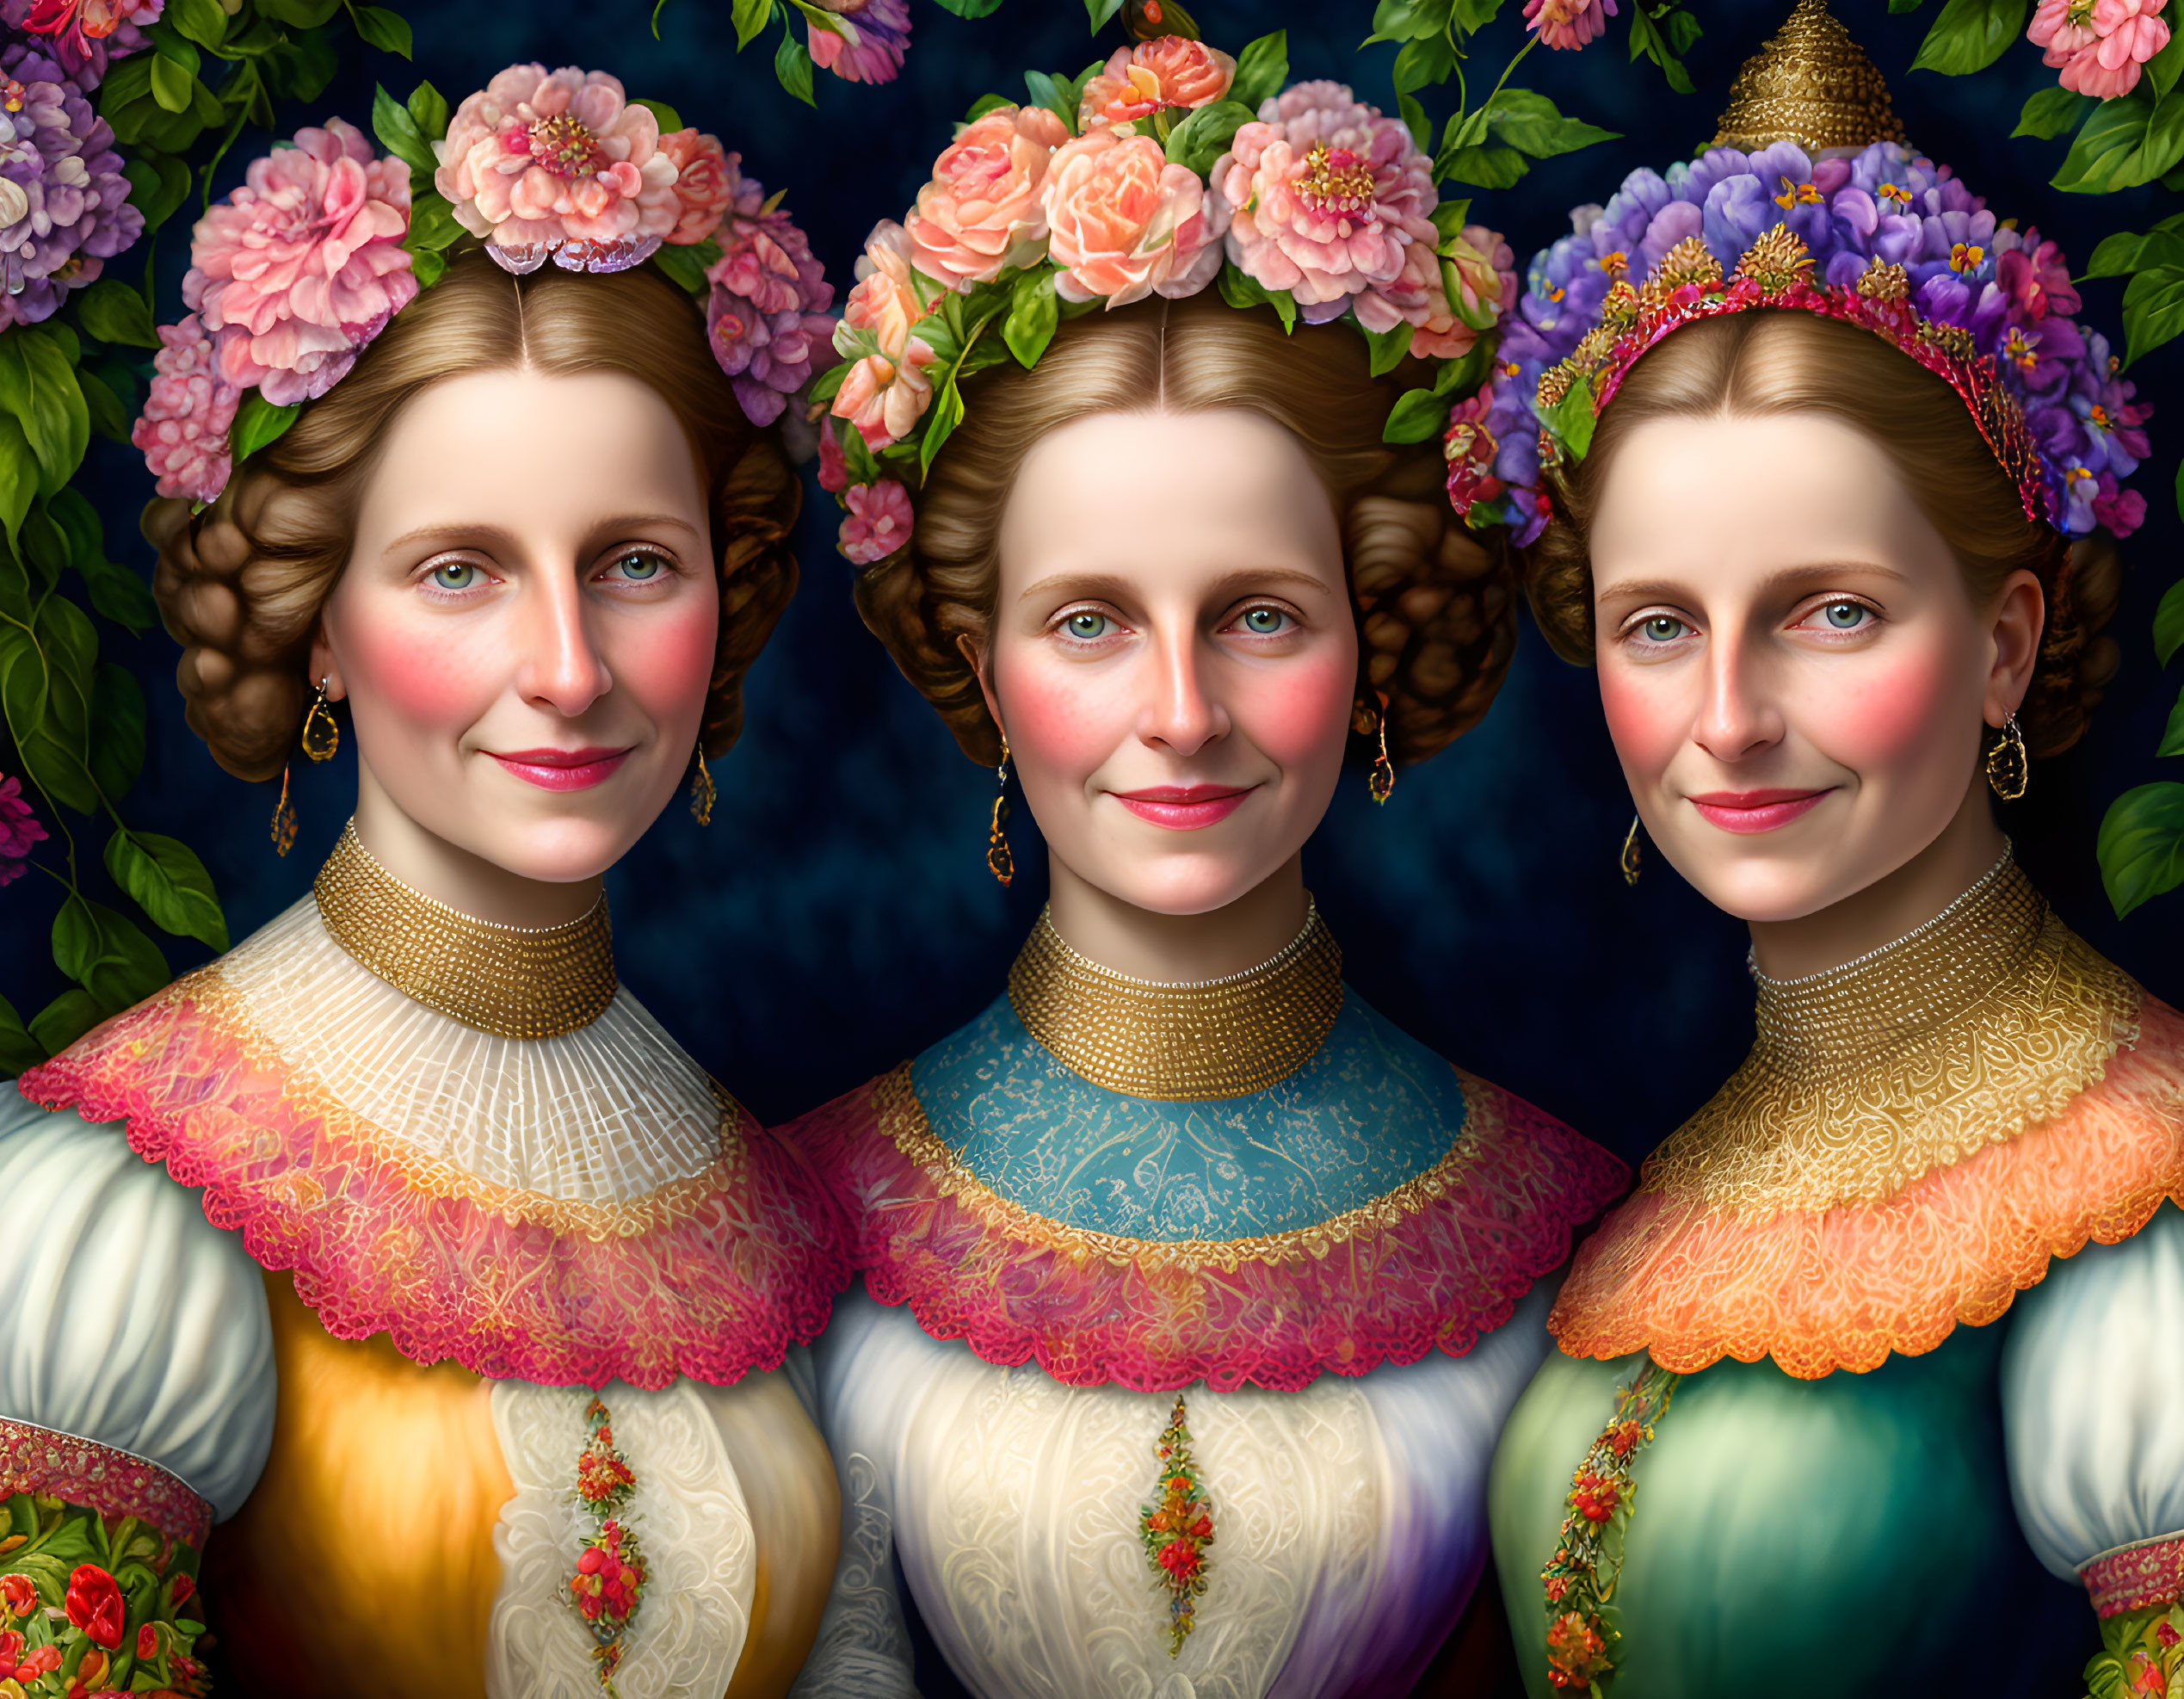 Three Women in Traditional Attire with Floral Headpieces Standing Against Floral Backdrop